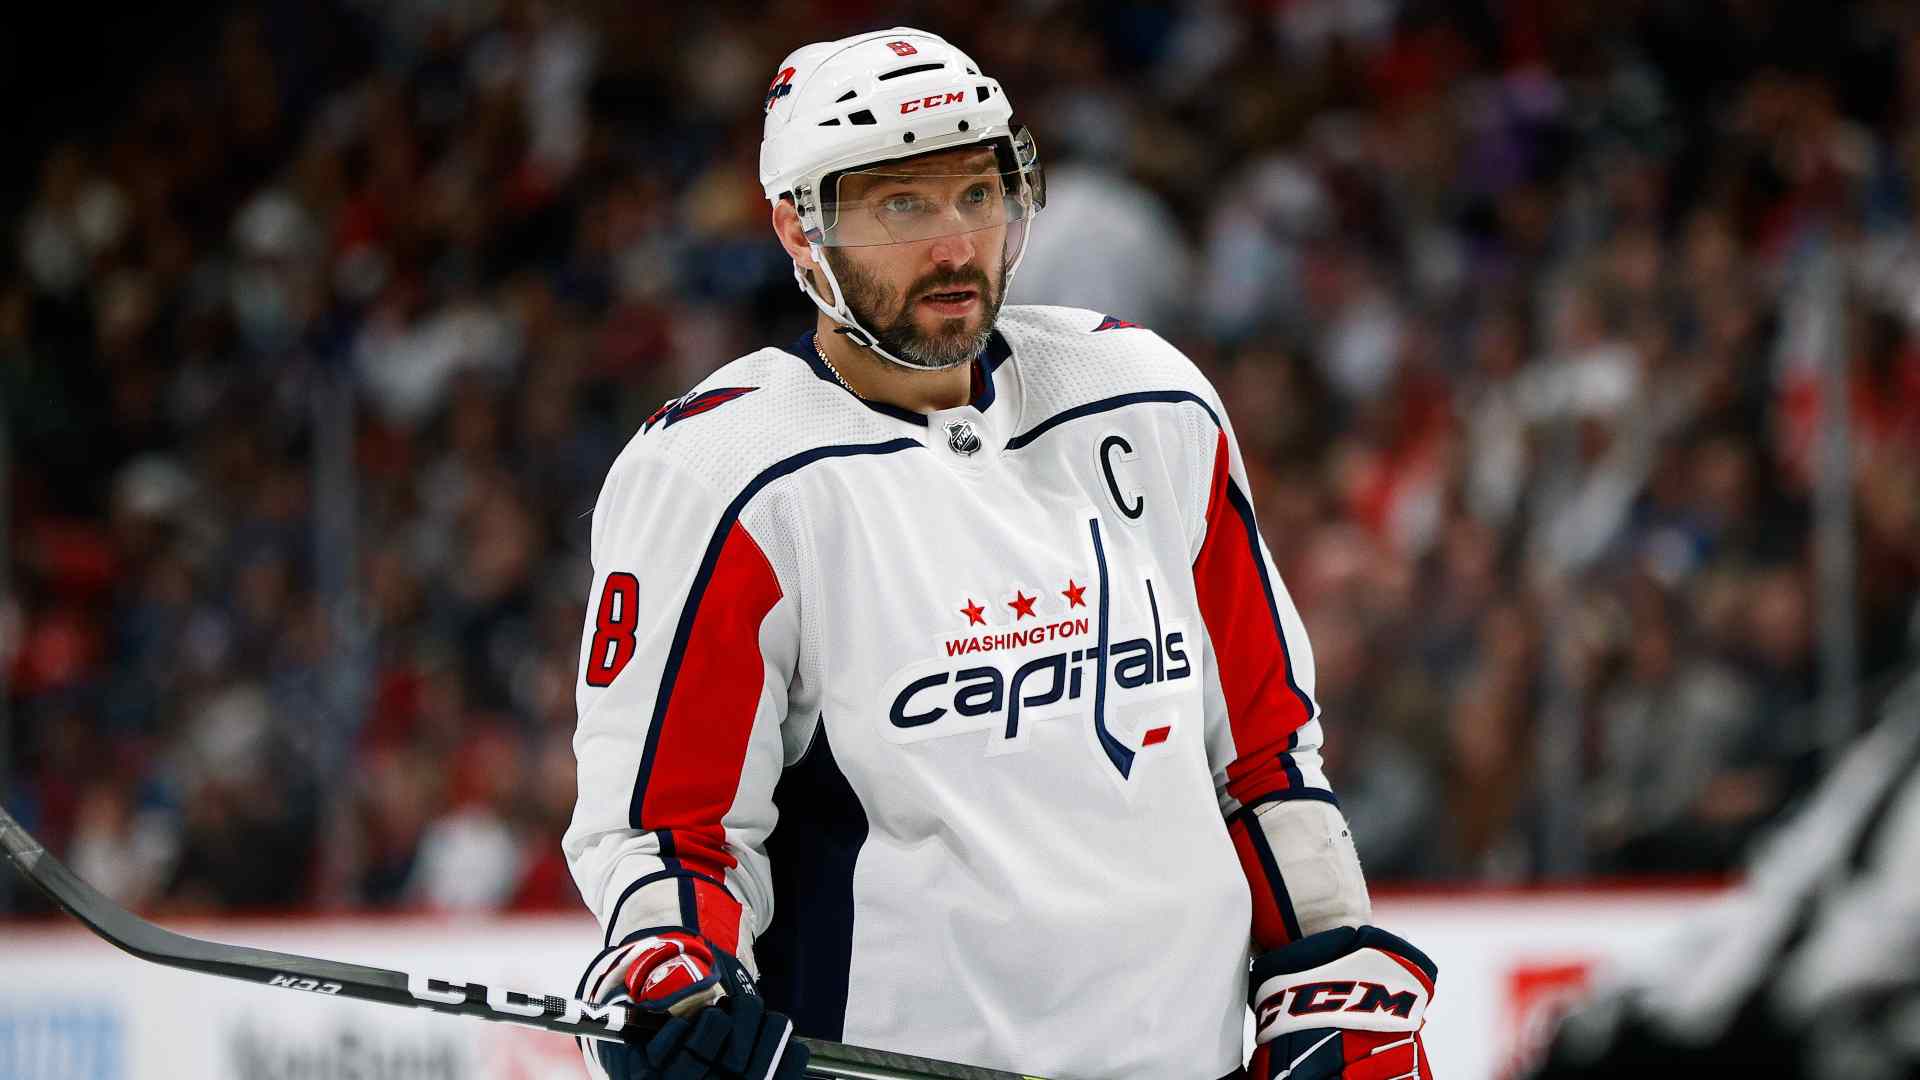 Hat trick gives Capitals captain Ovechkin 800 career goals - ESPN